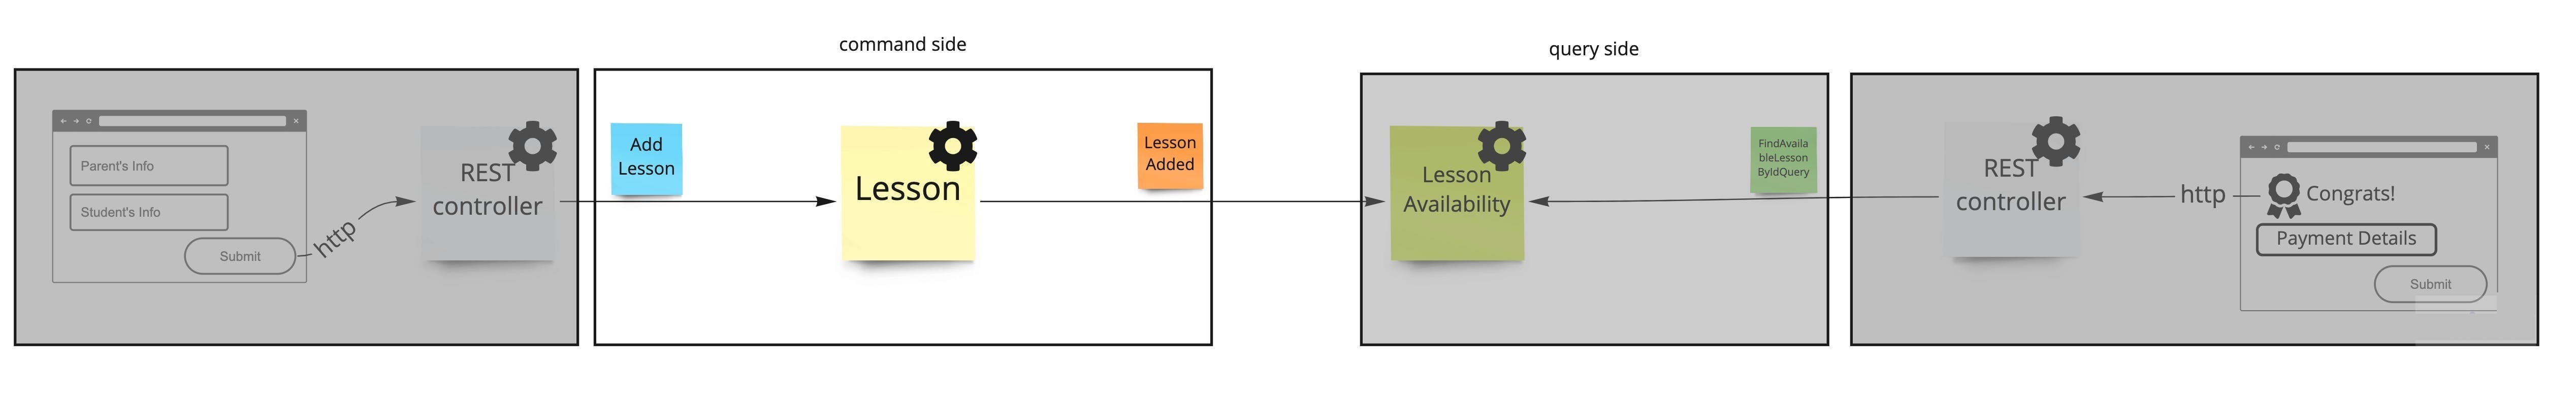 We start with the UI corresponding to the form to add a lesson. In this image we focus on the command side: The blue sticky note with the Add Lesson command, is classified to the &quot;command side&quot; area. The Add Lesson is linked to the Lesson Context (represented by a yellow sticky note), which representes the aggregate root, and generates a Lesson Added (orange sticky note) event that is sent to the query side. 